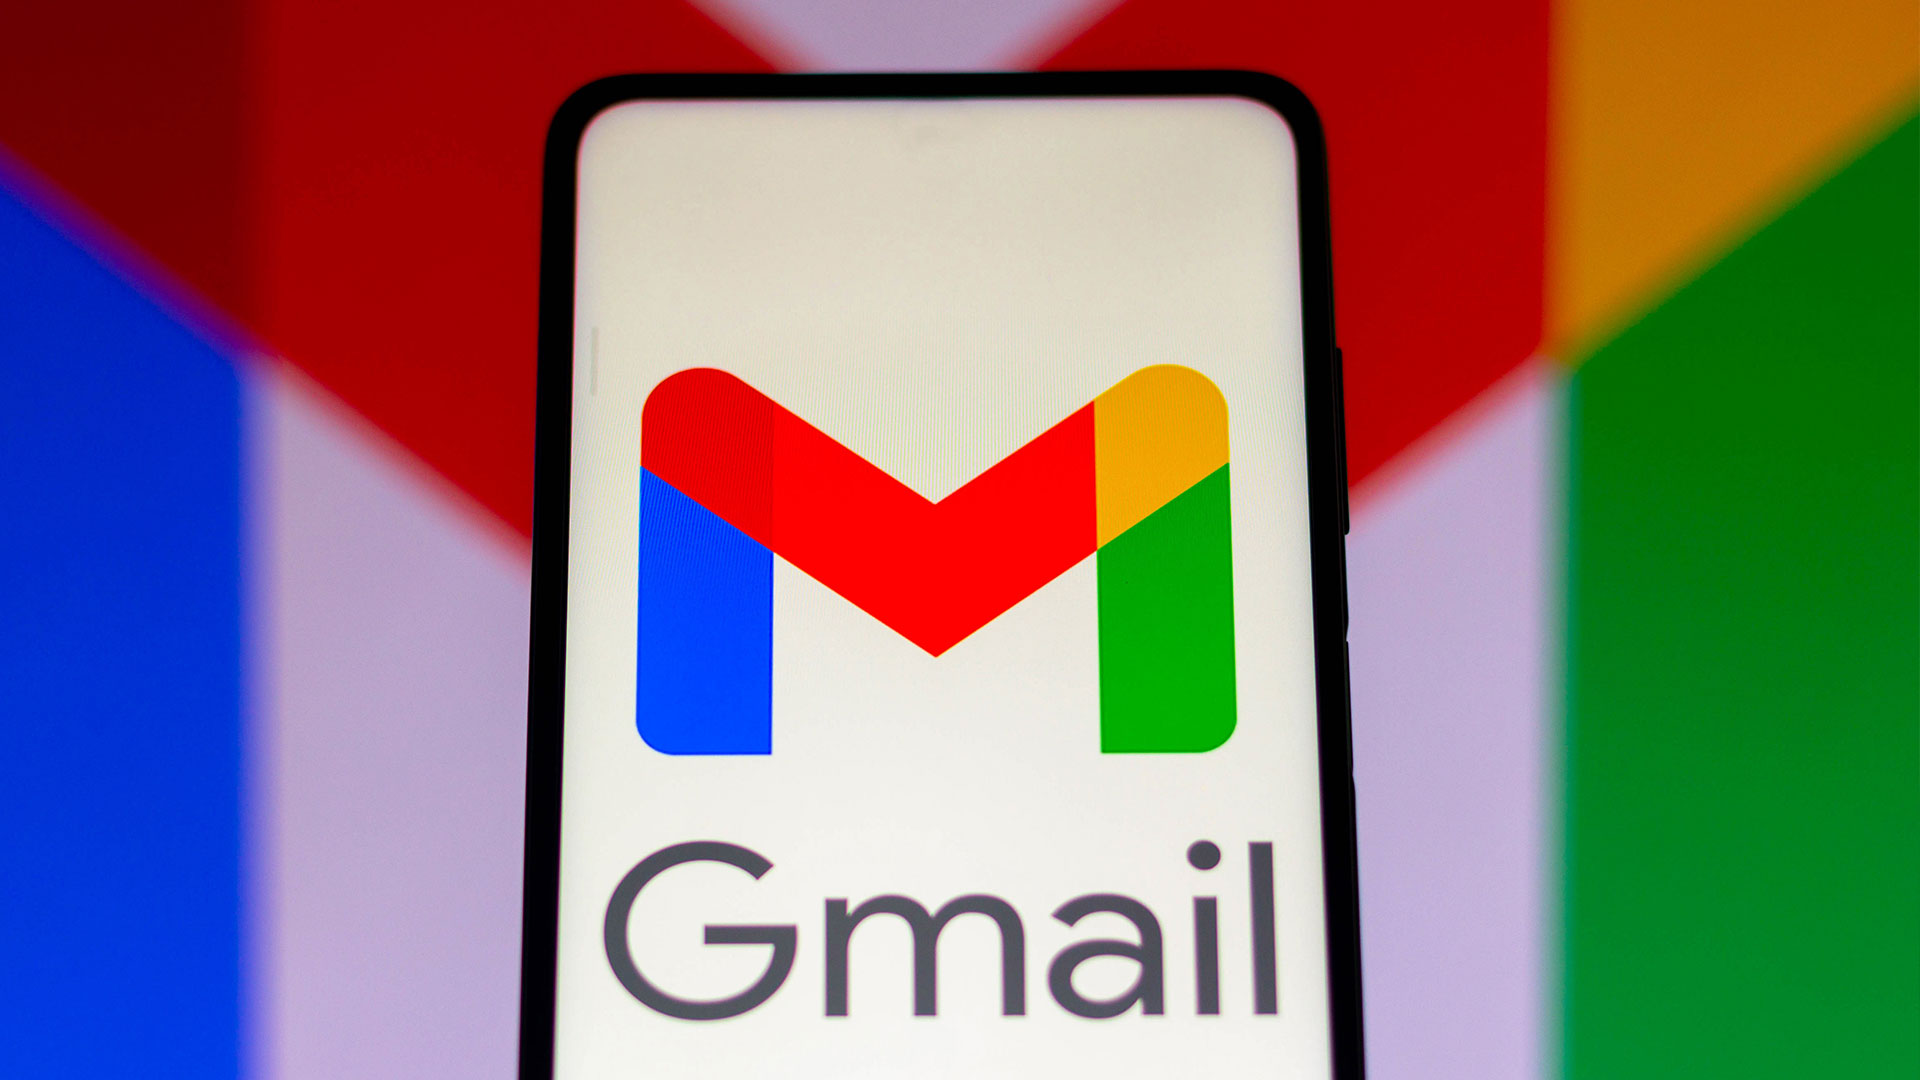 Warning: Security Experts Uncover Major ‘Name Mistake’ in Emails – Millions of Gmail and Outlook Users at Risk of Identity Theft!